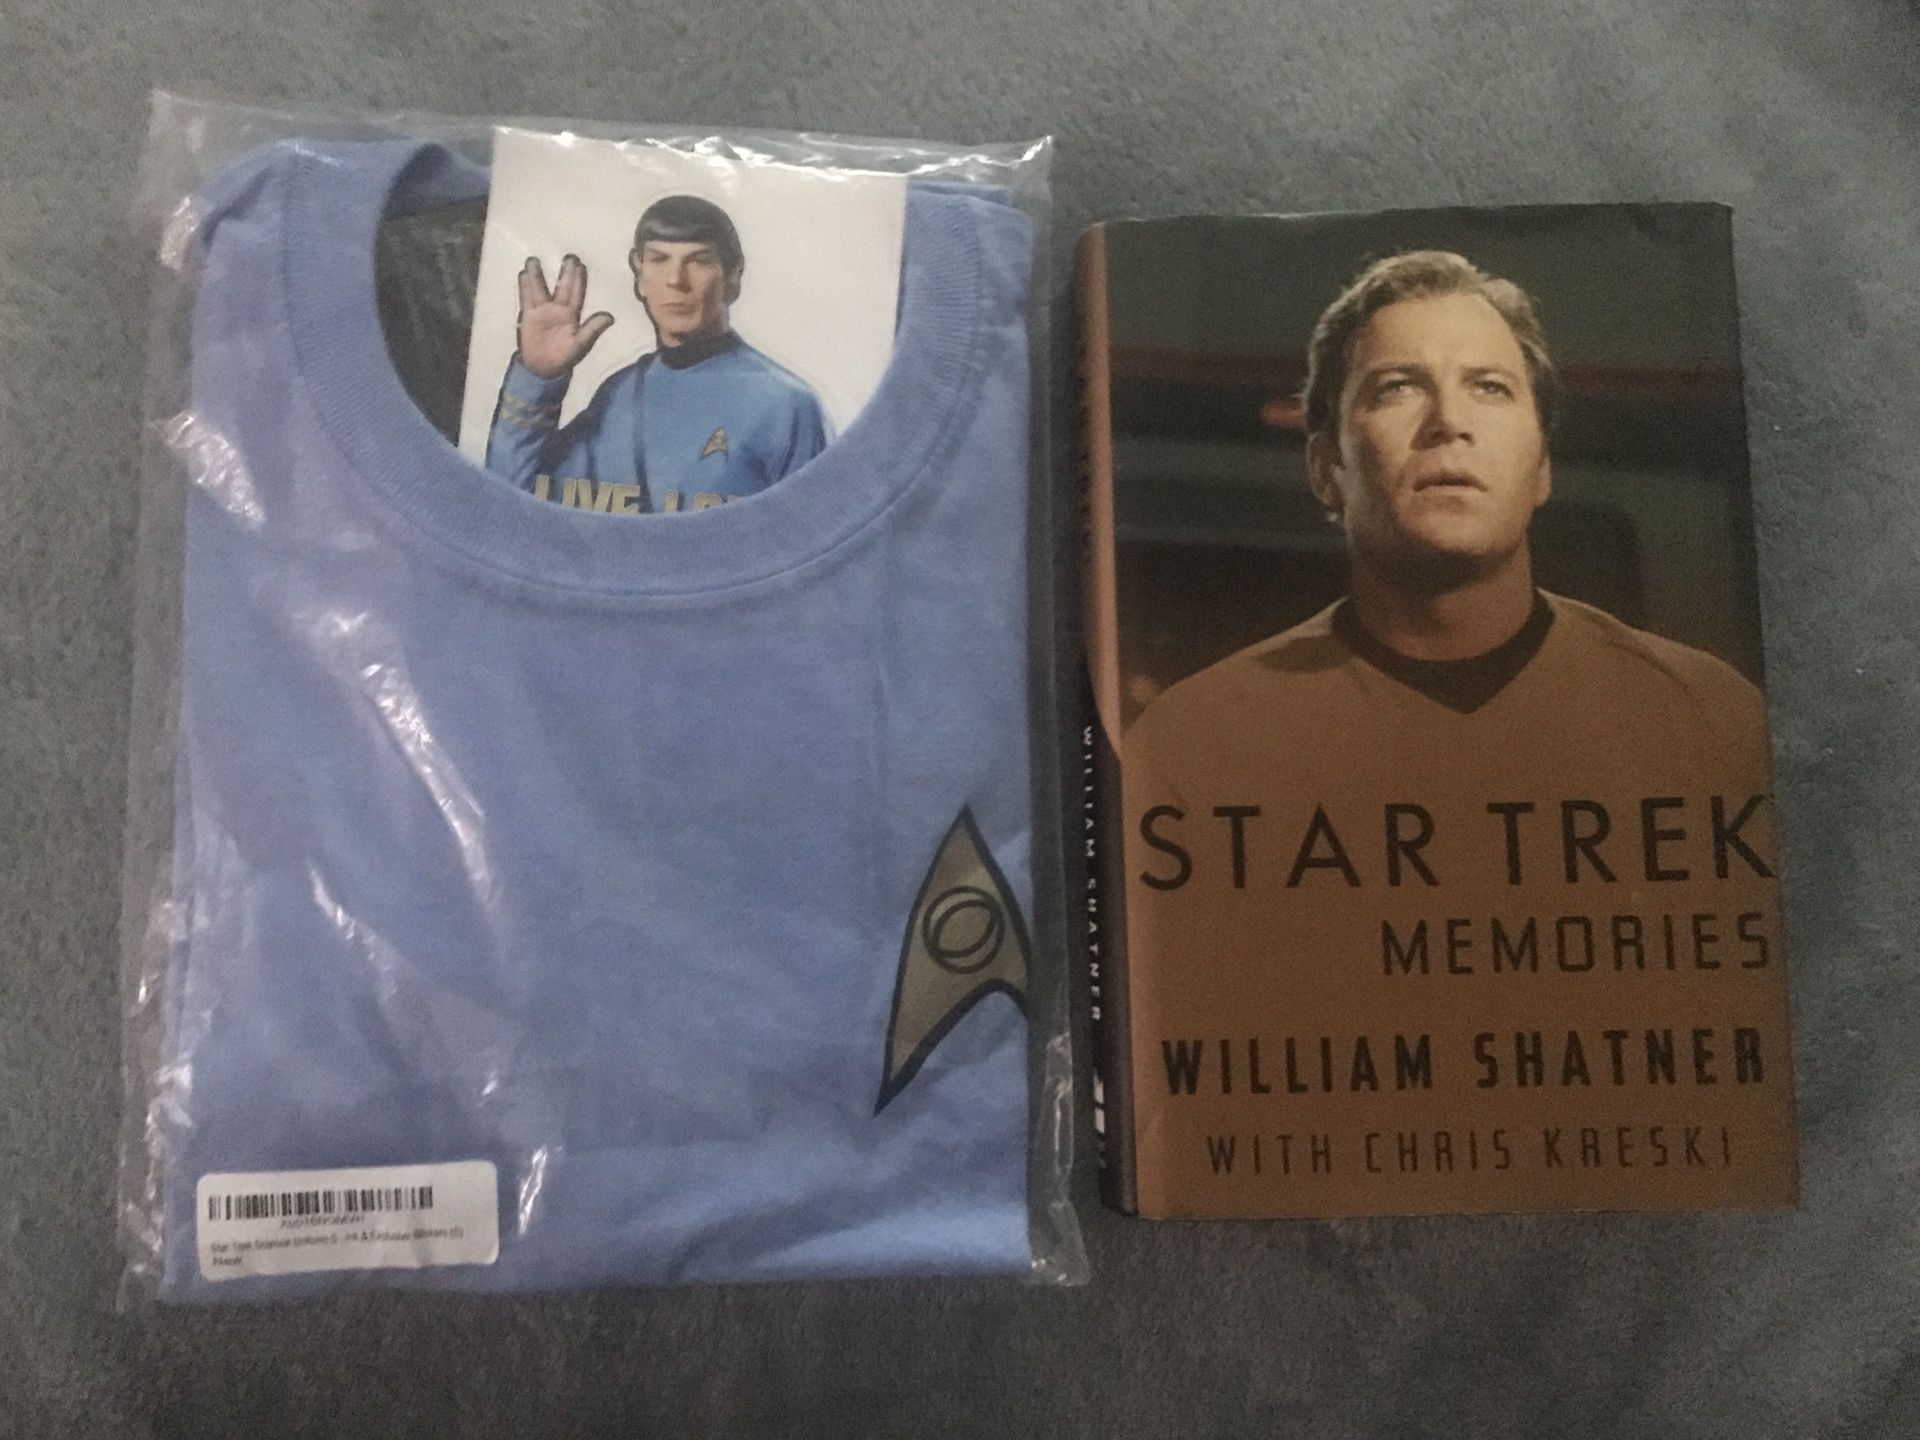 New - Star Trek Hardback Book and Tee with stickers Set